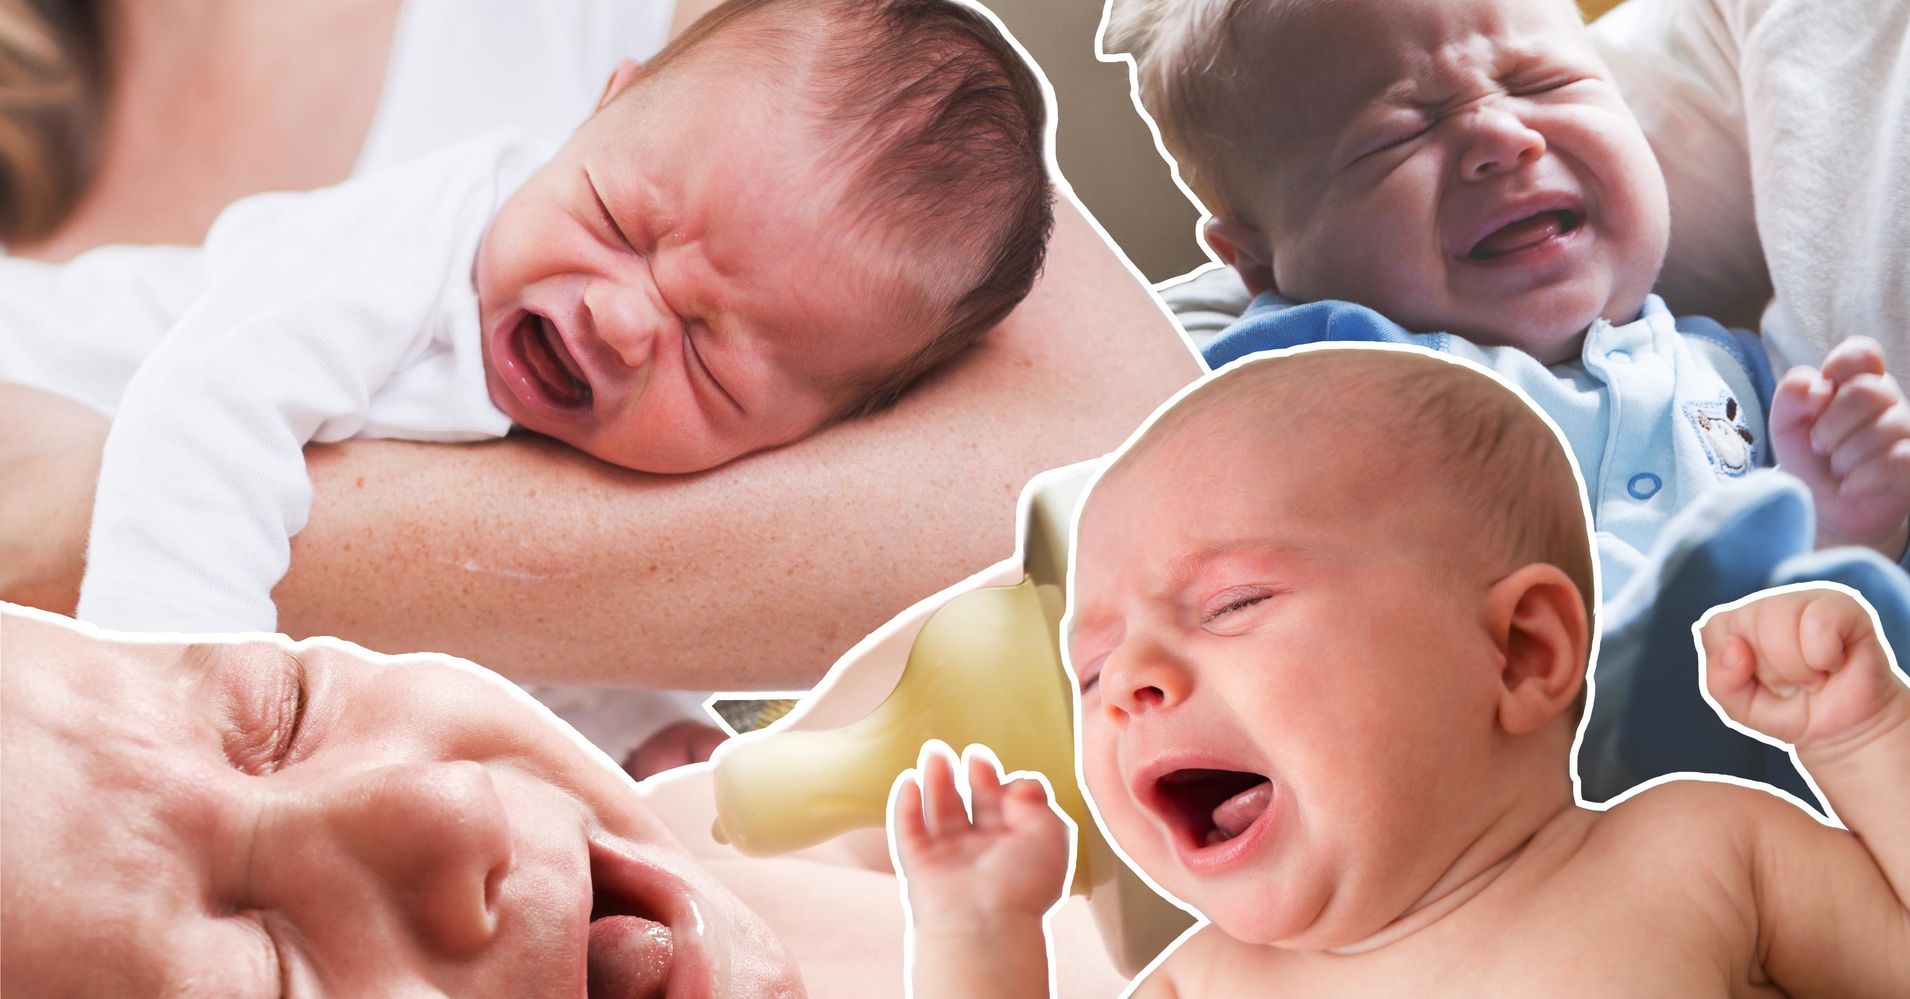 Why Do Some Babies Develop Teeth Late?